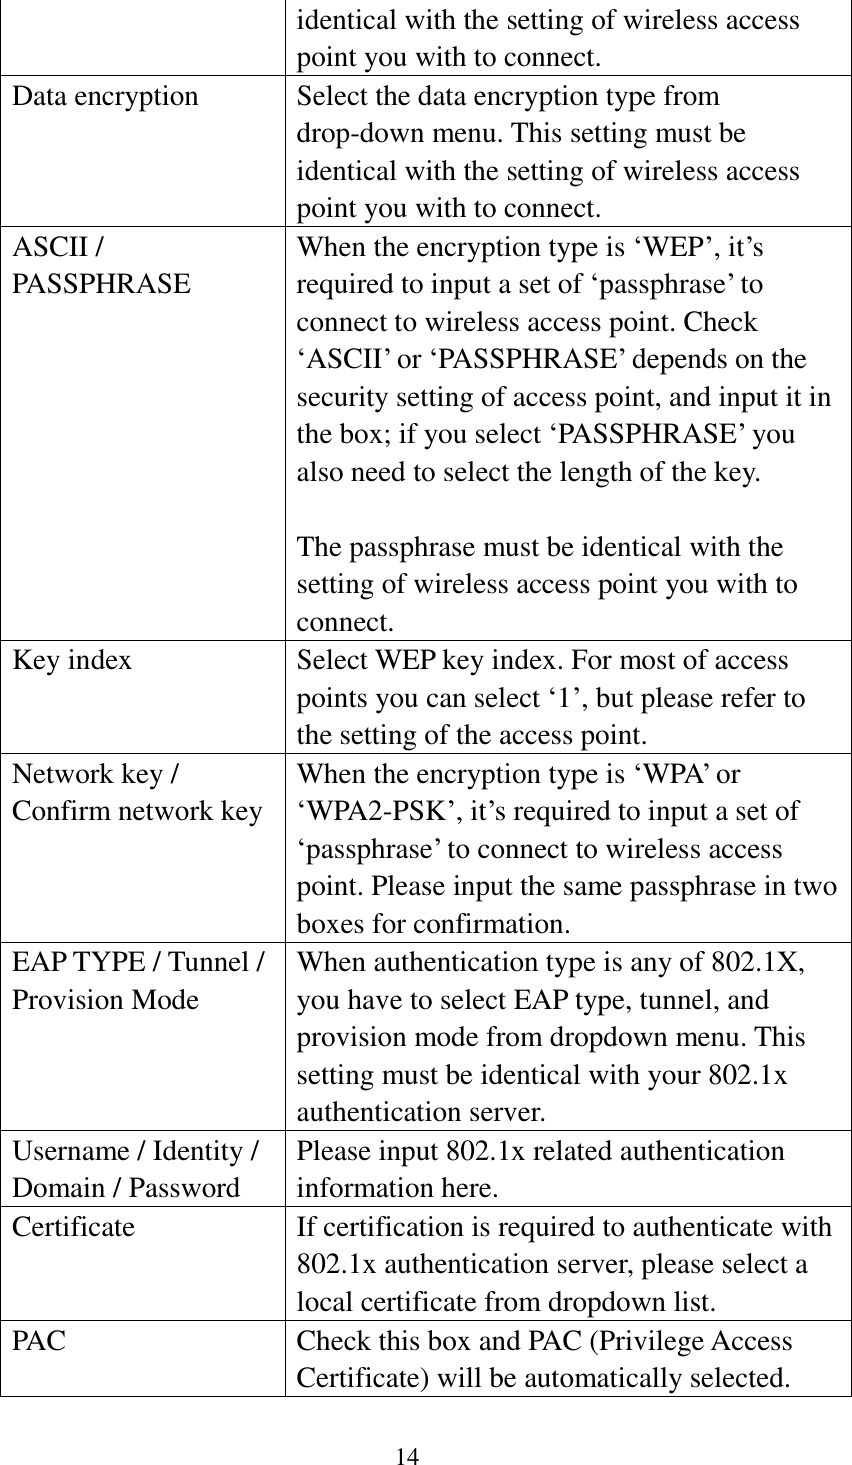 14  identical with the setting of wireless access point you with to connect. Data encryption Select the data encryption type from drop-down menu. This setting must be identical with the setting of wireless access point you with to connect. ASCII / PASSPHRASE When the encryption type is ‘WEP’, it’s required to input a set of ‘passphrase’ to connect to wireless access point. Check ‘ASCII’ or ‘PASSPHRASE’ depends on the security setting of access point, and input it in the box; if you select ‘PASSPHRASE’ you also need to select the length of the key.  The passphrase must be identical with the setting of wireless access point you with to connect. Key index Select WEP key index. For most of access points you can select ‘1’, but please refer to the setting of the access point. Network key / Confirm network key When the encryption type is ‘WPA’ or ‘WPA2-PSK’, it’s required to input a set of ‘passphrase’ to connect to wireless access point. Please input the same passphrase in two boxes for confirmation. EAP TYPE / Tunnel / Provision Mode When authentication type is any of 802.1X, you have to select EAP type, tunnel, and provision mode from dropdown menu. This setting must be identical with your 802.1x authentication server. Username / Identity / Domain / Password Please input 802.1x related authentication information here. Certificate If certification is required to authenticate with 802.1x authentication server, please select a local certificate from dropdown list. PAC Check this box and PAC (Privilege Access Certificate) will be automatically selected.  